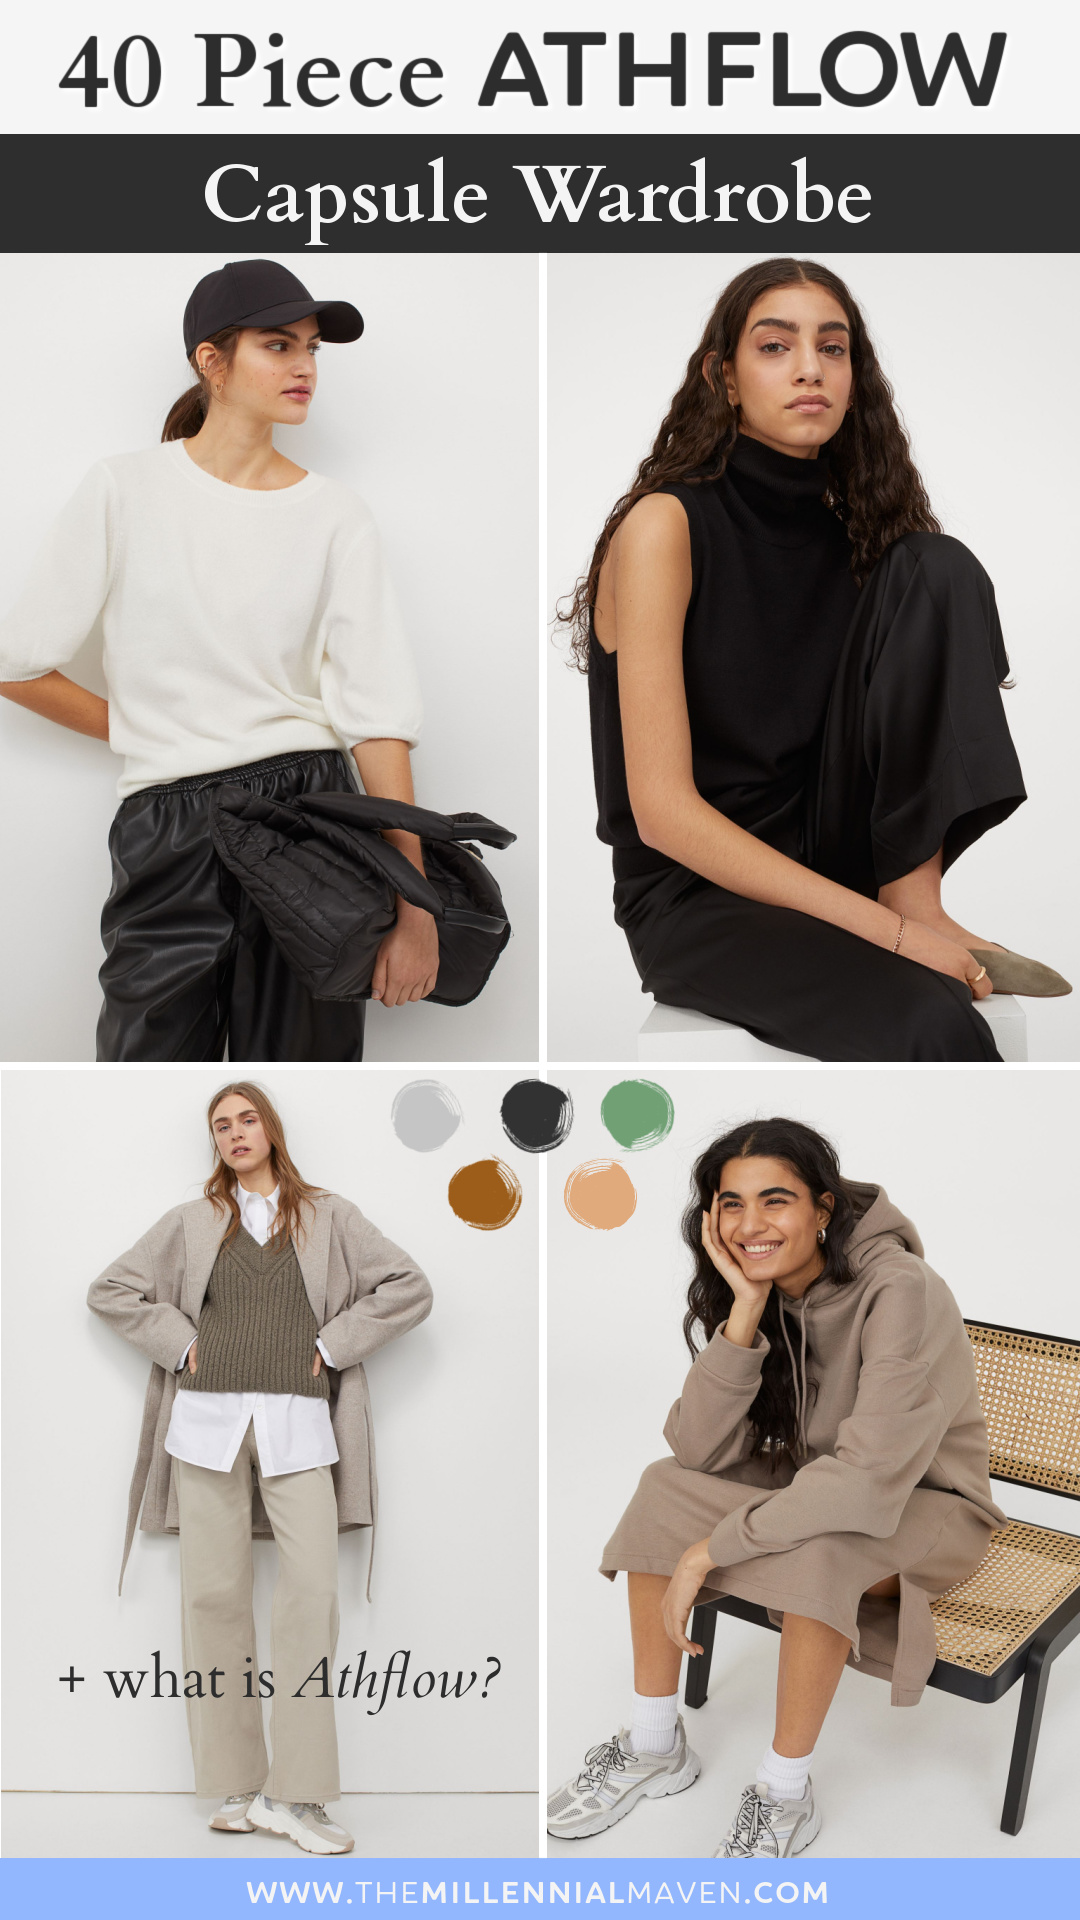 ATHFLOW is where "Athleisure" meets "Work Flow." Soft outfits that keep you productive &amp; comfy at the same time. | Athflow Capsule Wardrobe #athflowcapsulewardrobe #athleisurecapsulewardrobe #matchingsweatsuit #workfromhomeoutfits